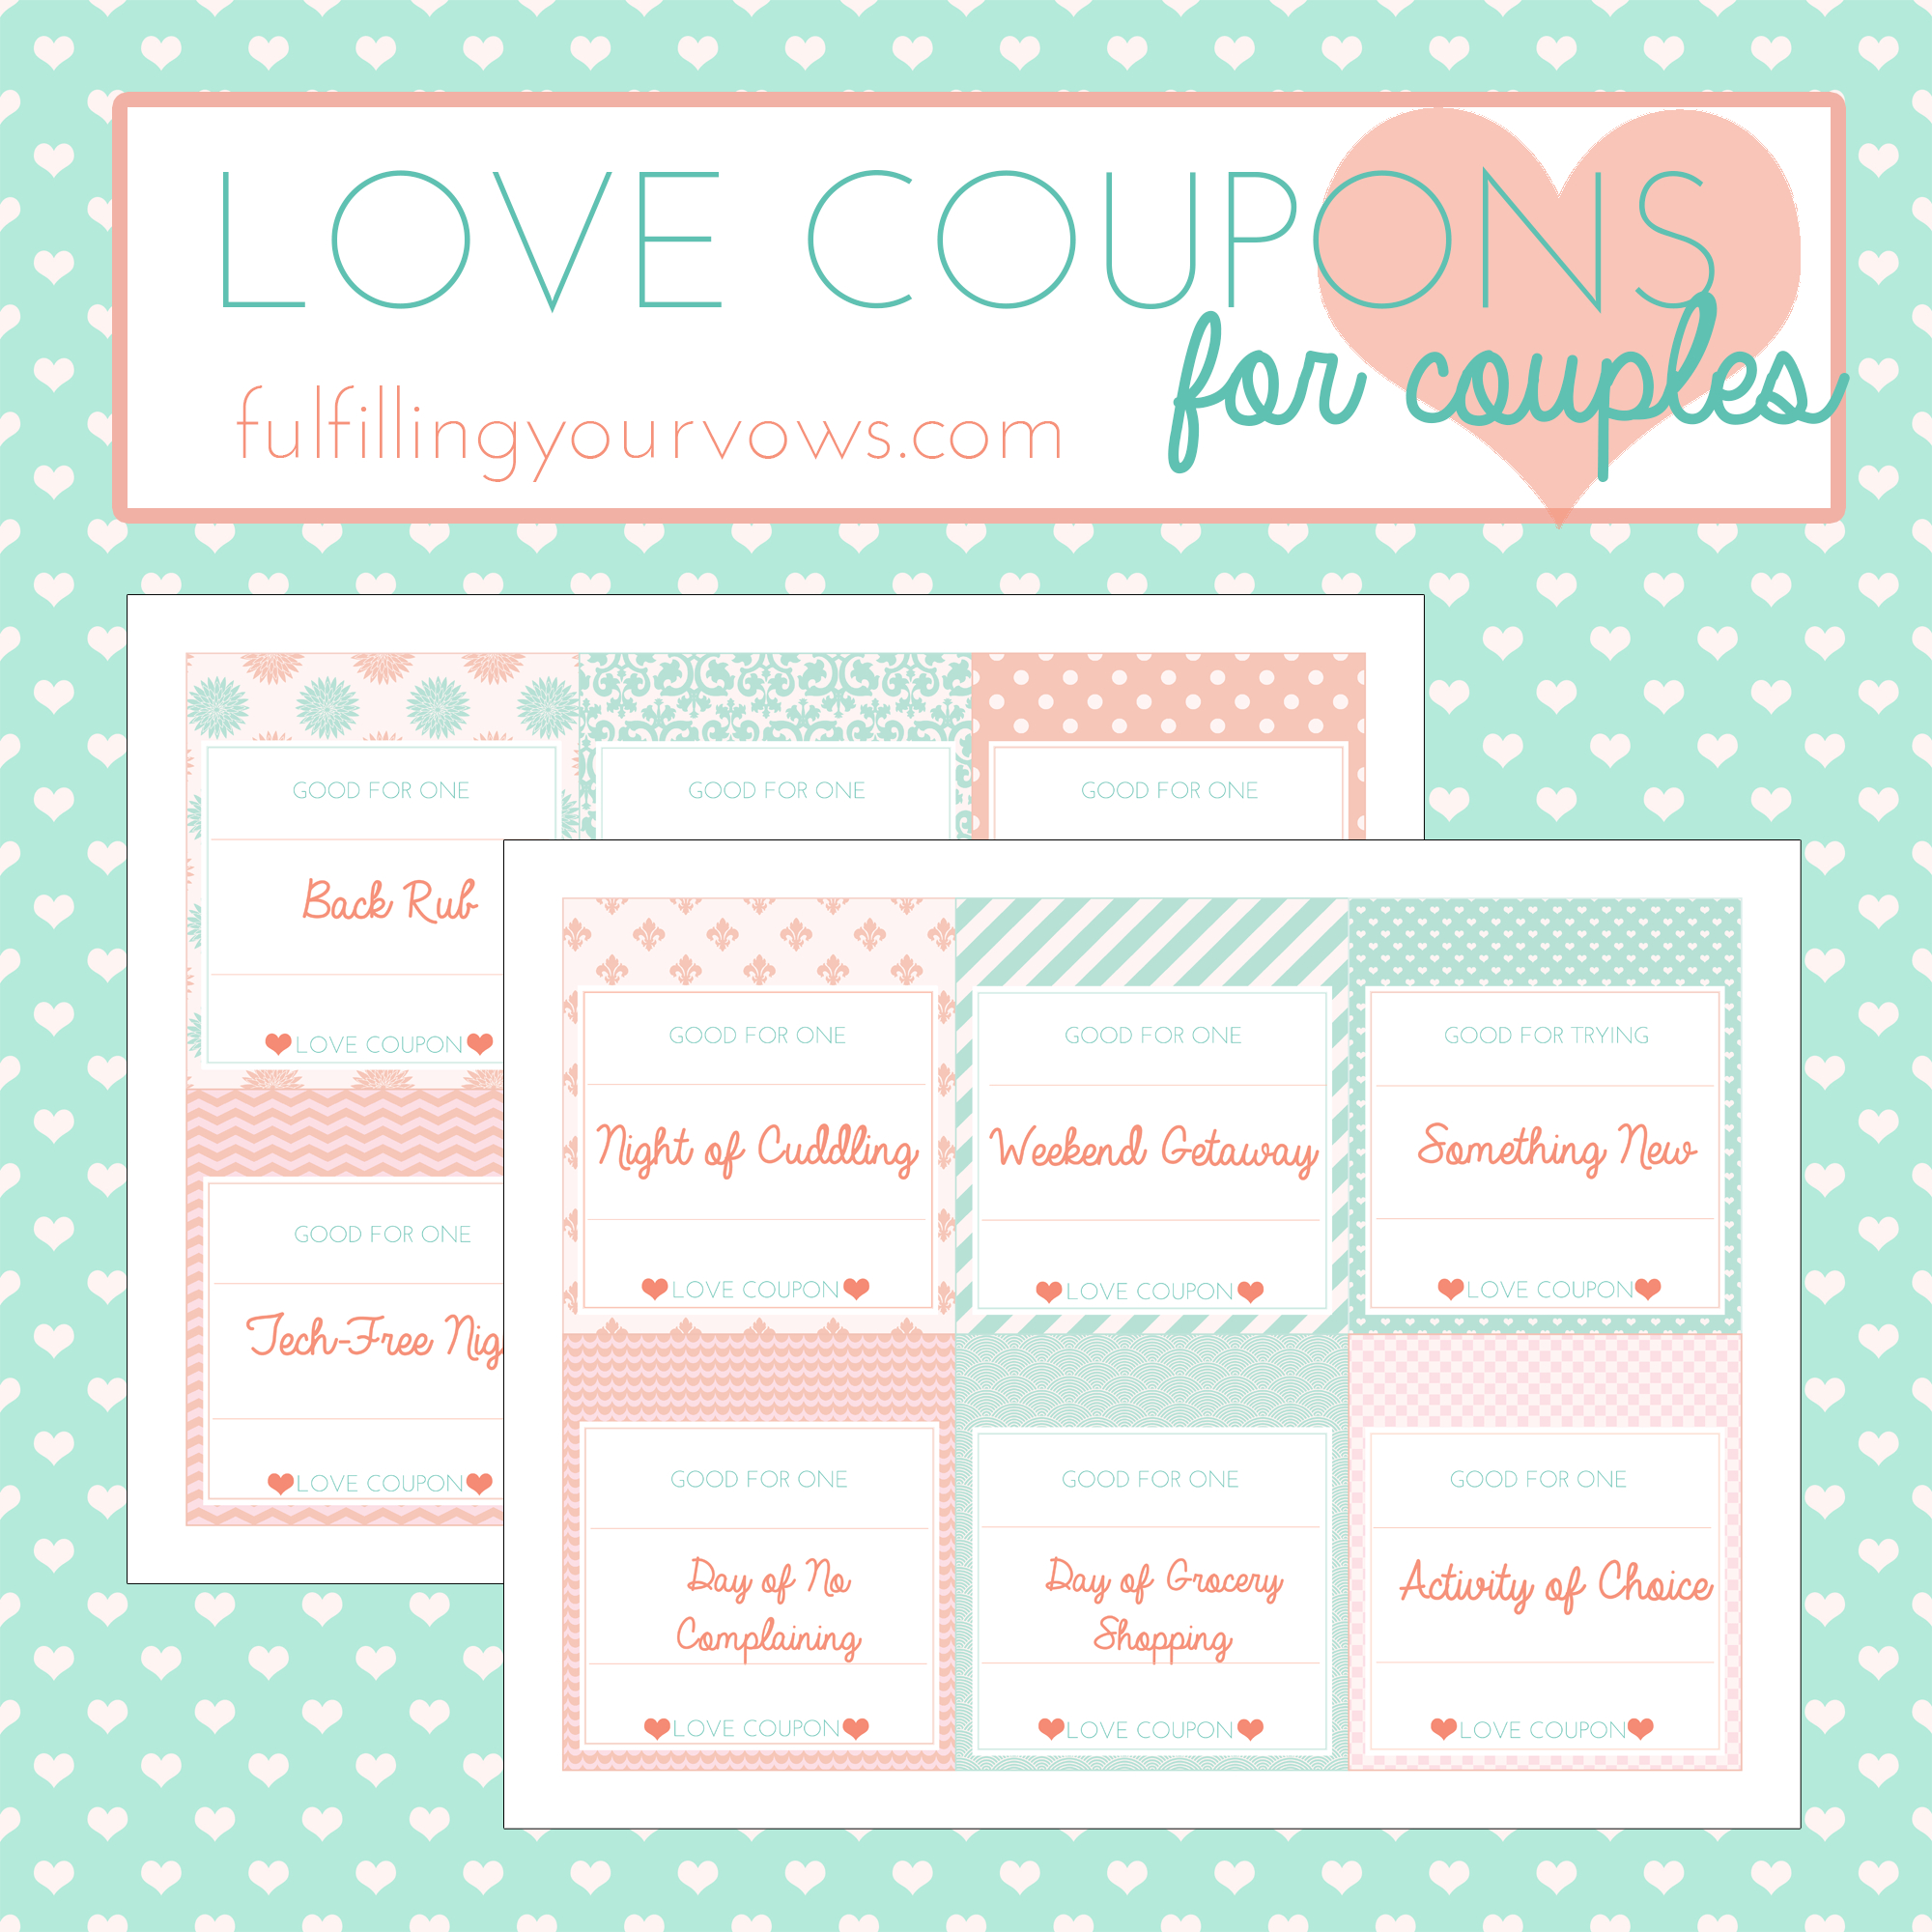 Free Printable Love Coupons For Couples - Fulfilling Your Vows - Free Printable Love Coupons